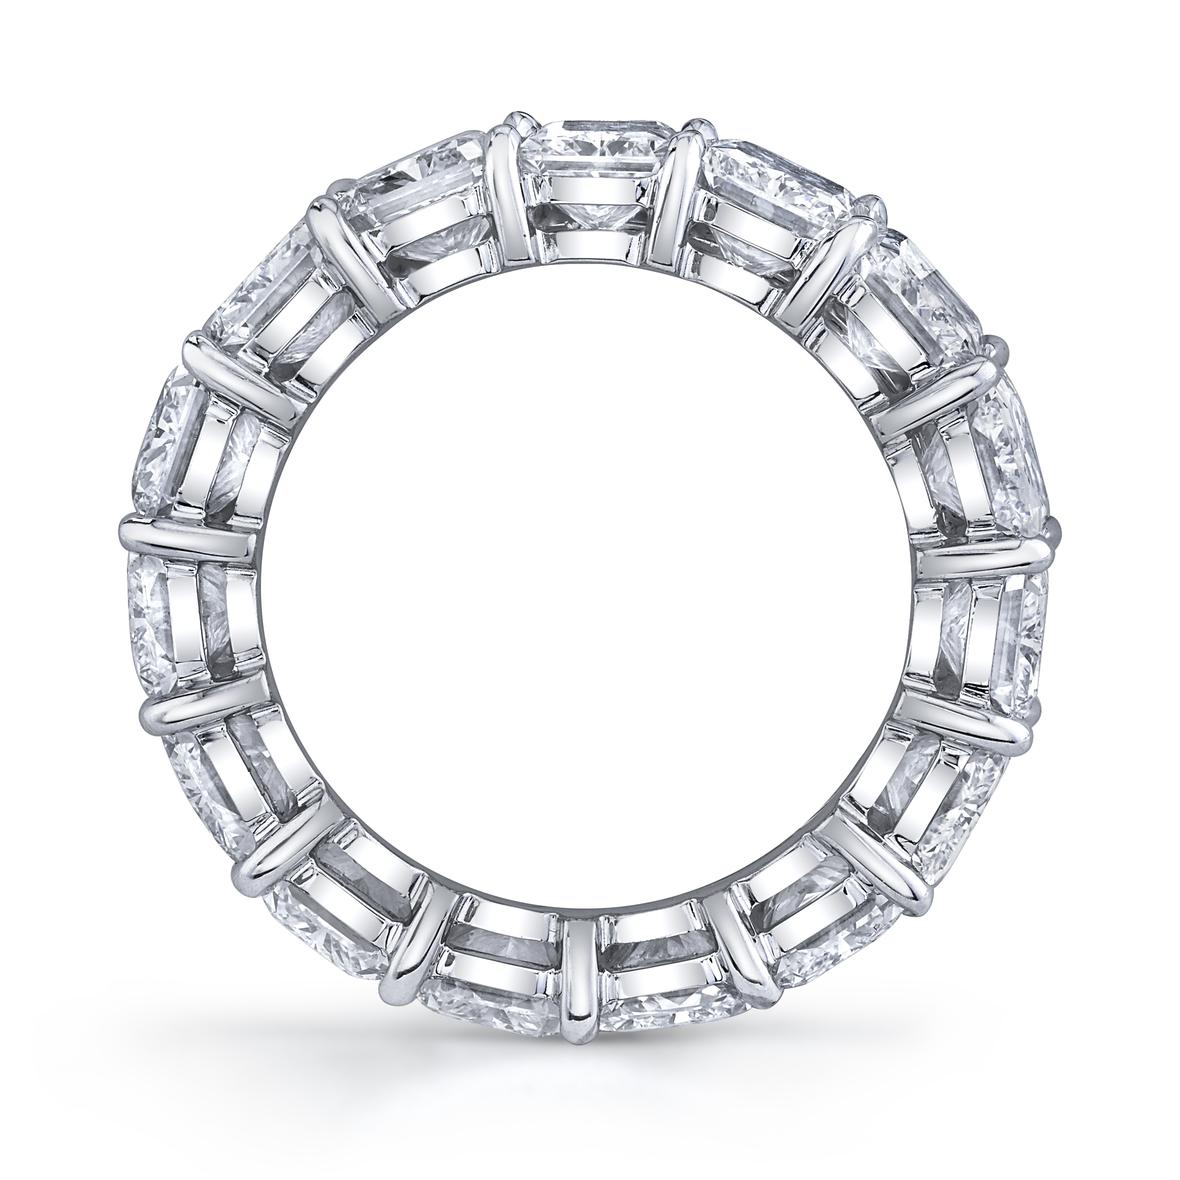 15 Radiant Cut Diamonds set in platinum eternity band ring.
10.90 carats total weight
All stones are certified by GIA.
Colors H - I
Clarity VVS1 - VS2
Ring Size 6.5